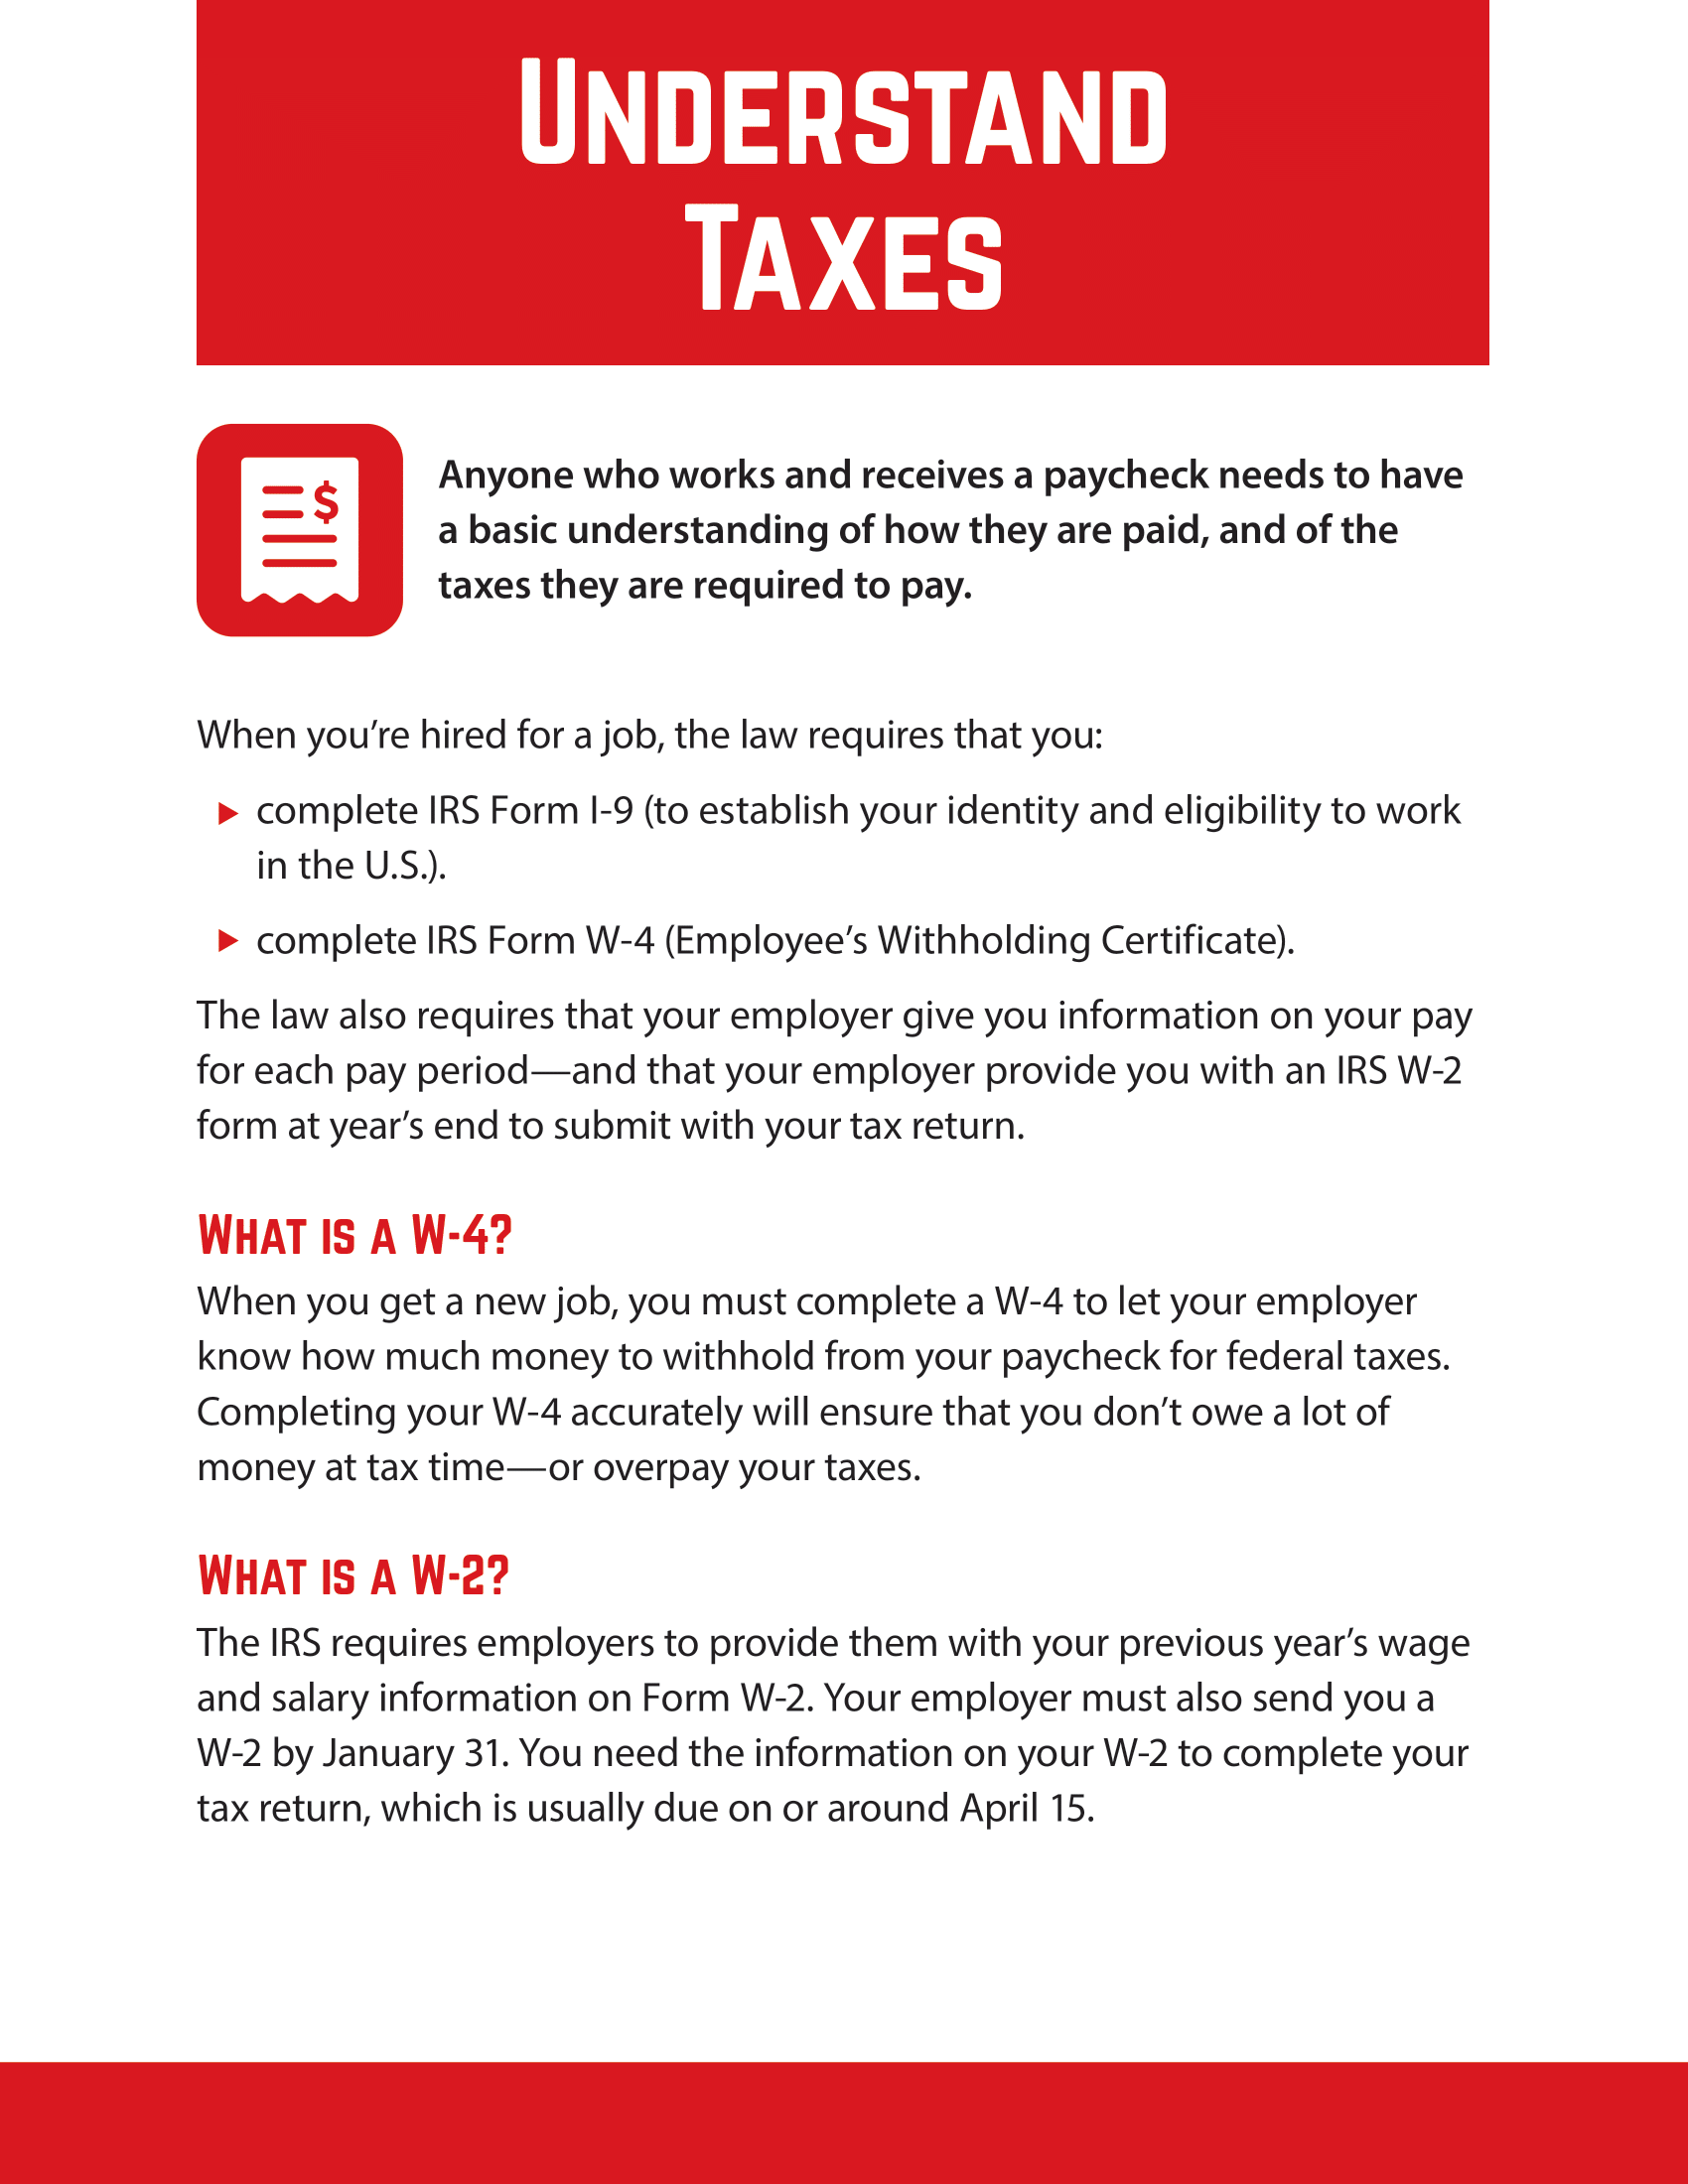 Understand Taxes